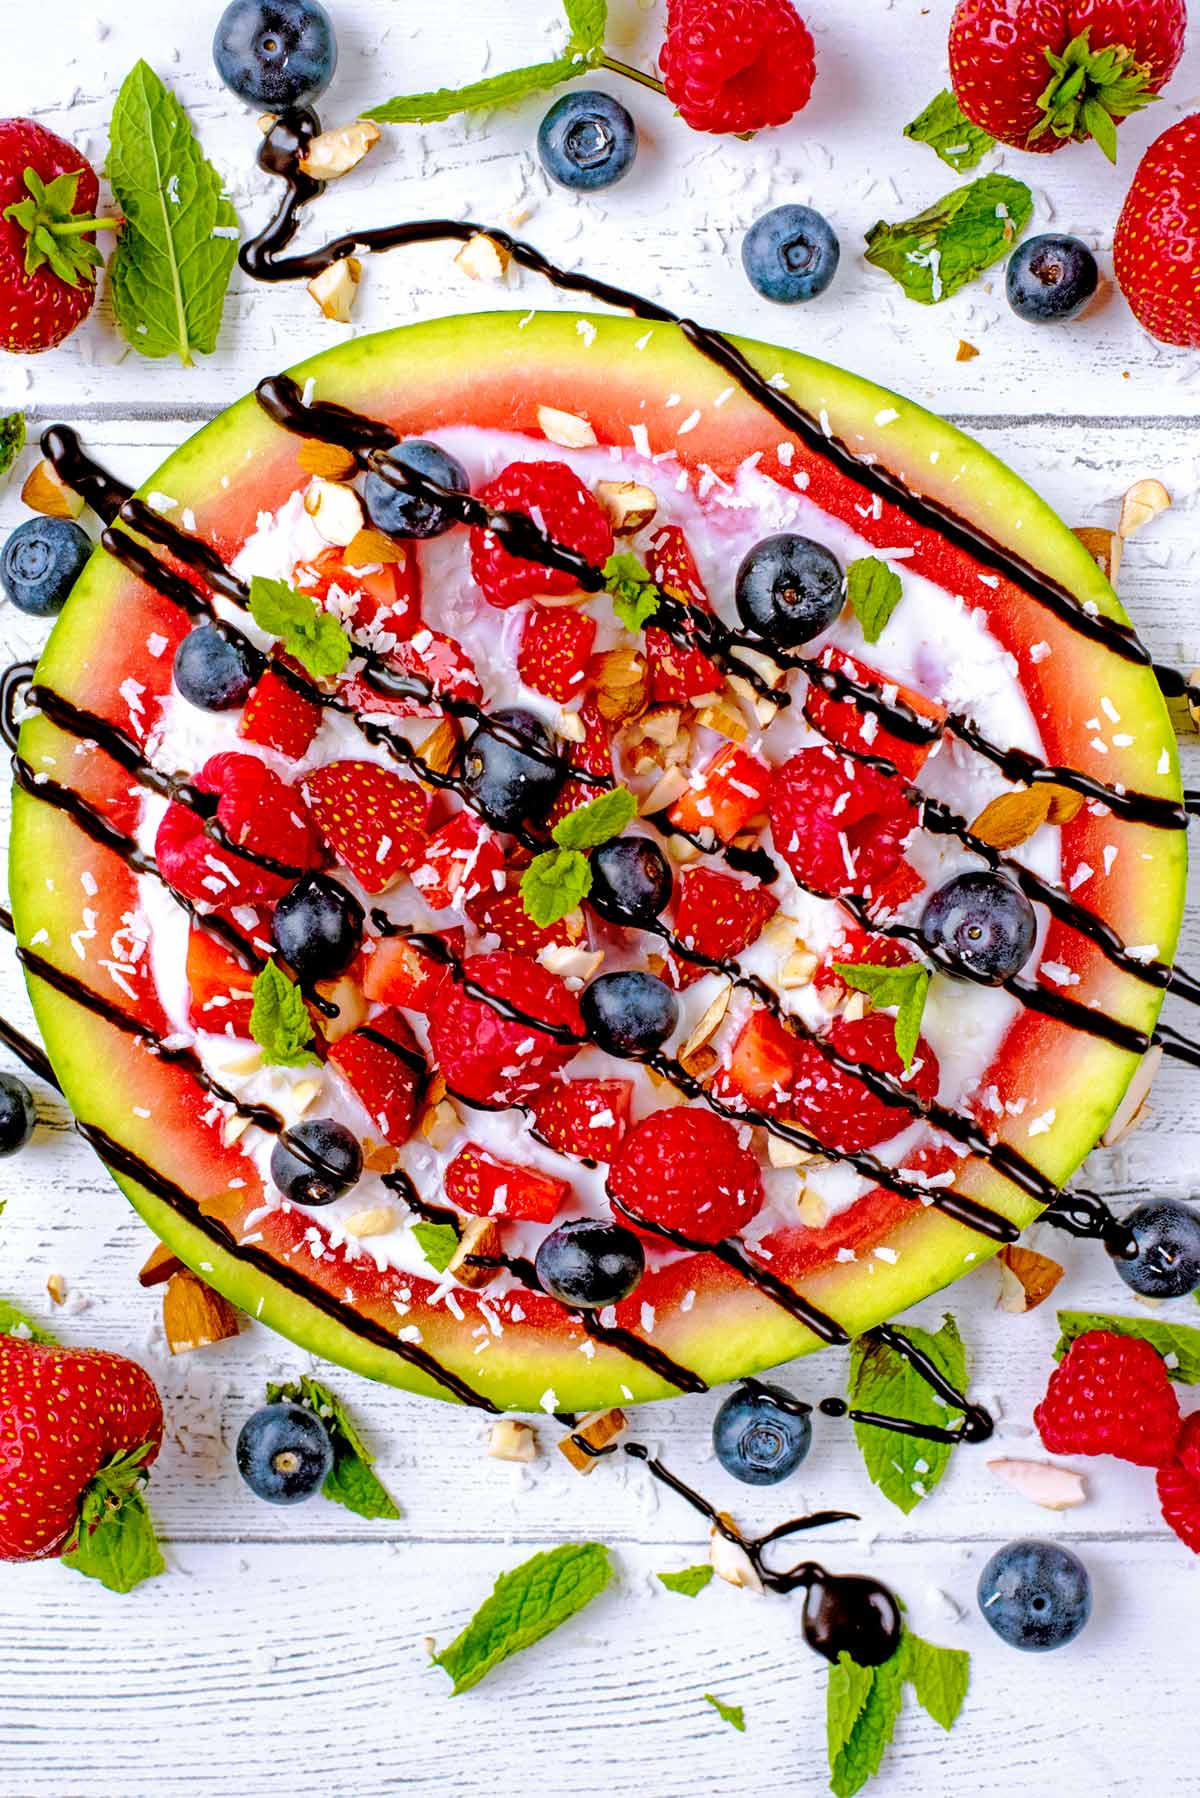 A round slice of watermelon, topped with yogurt and fruit.